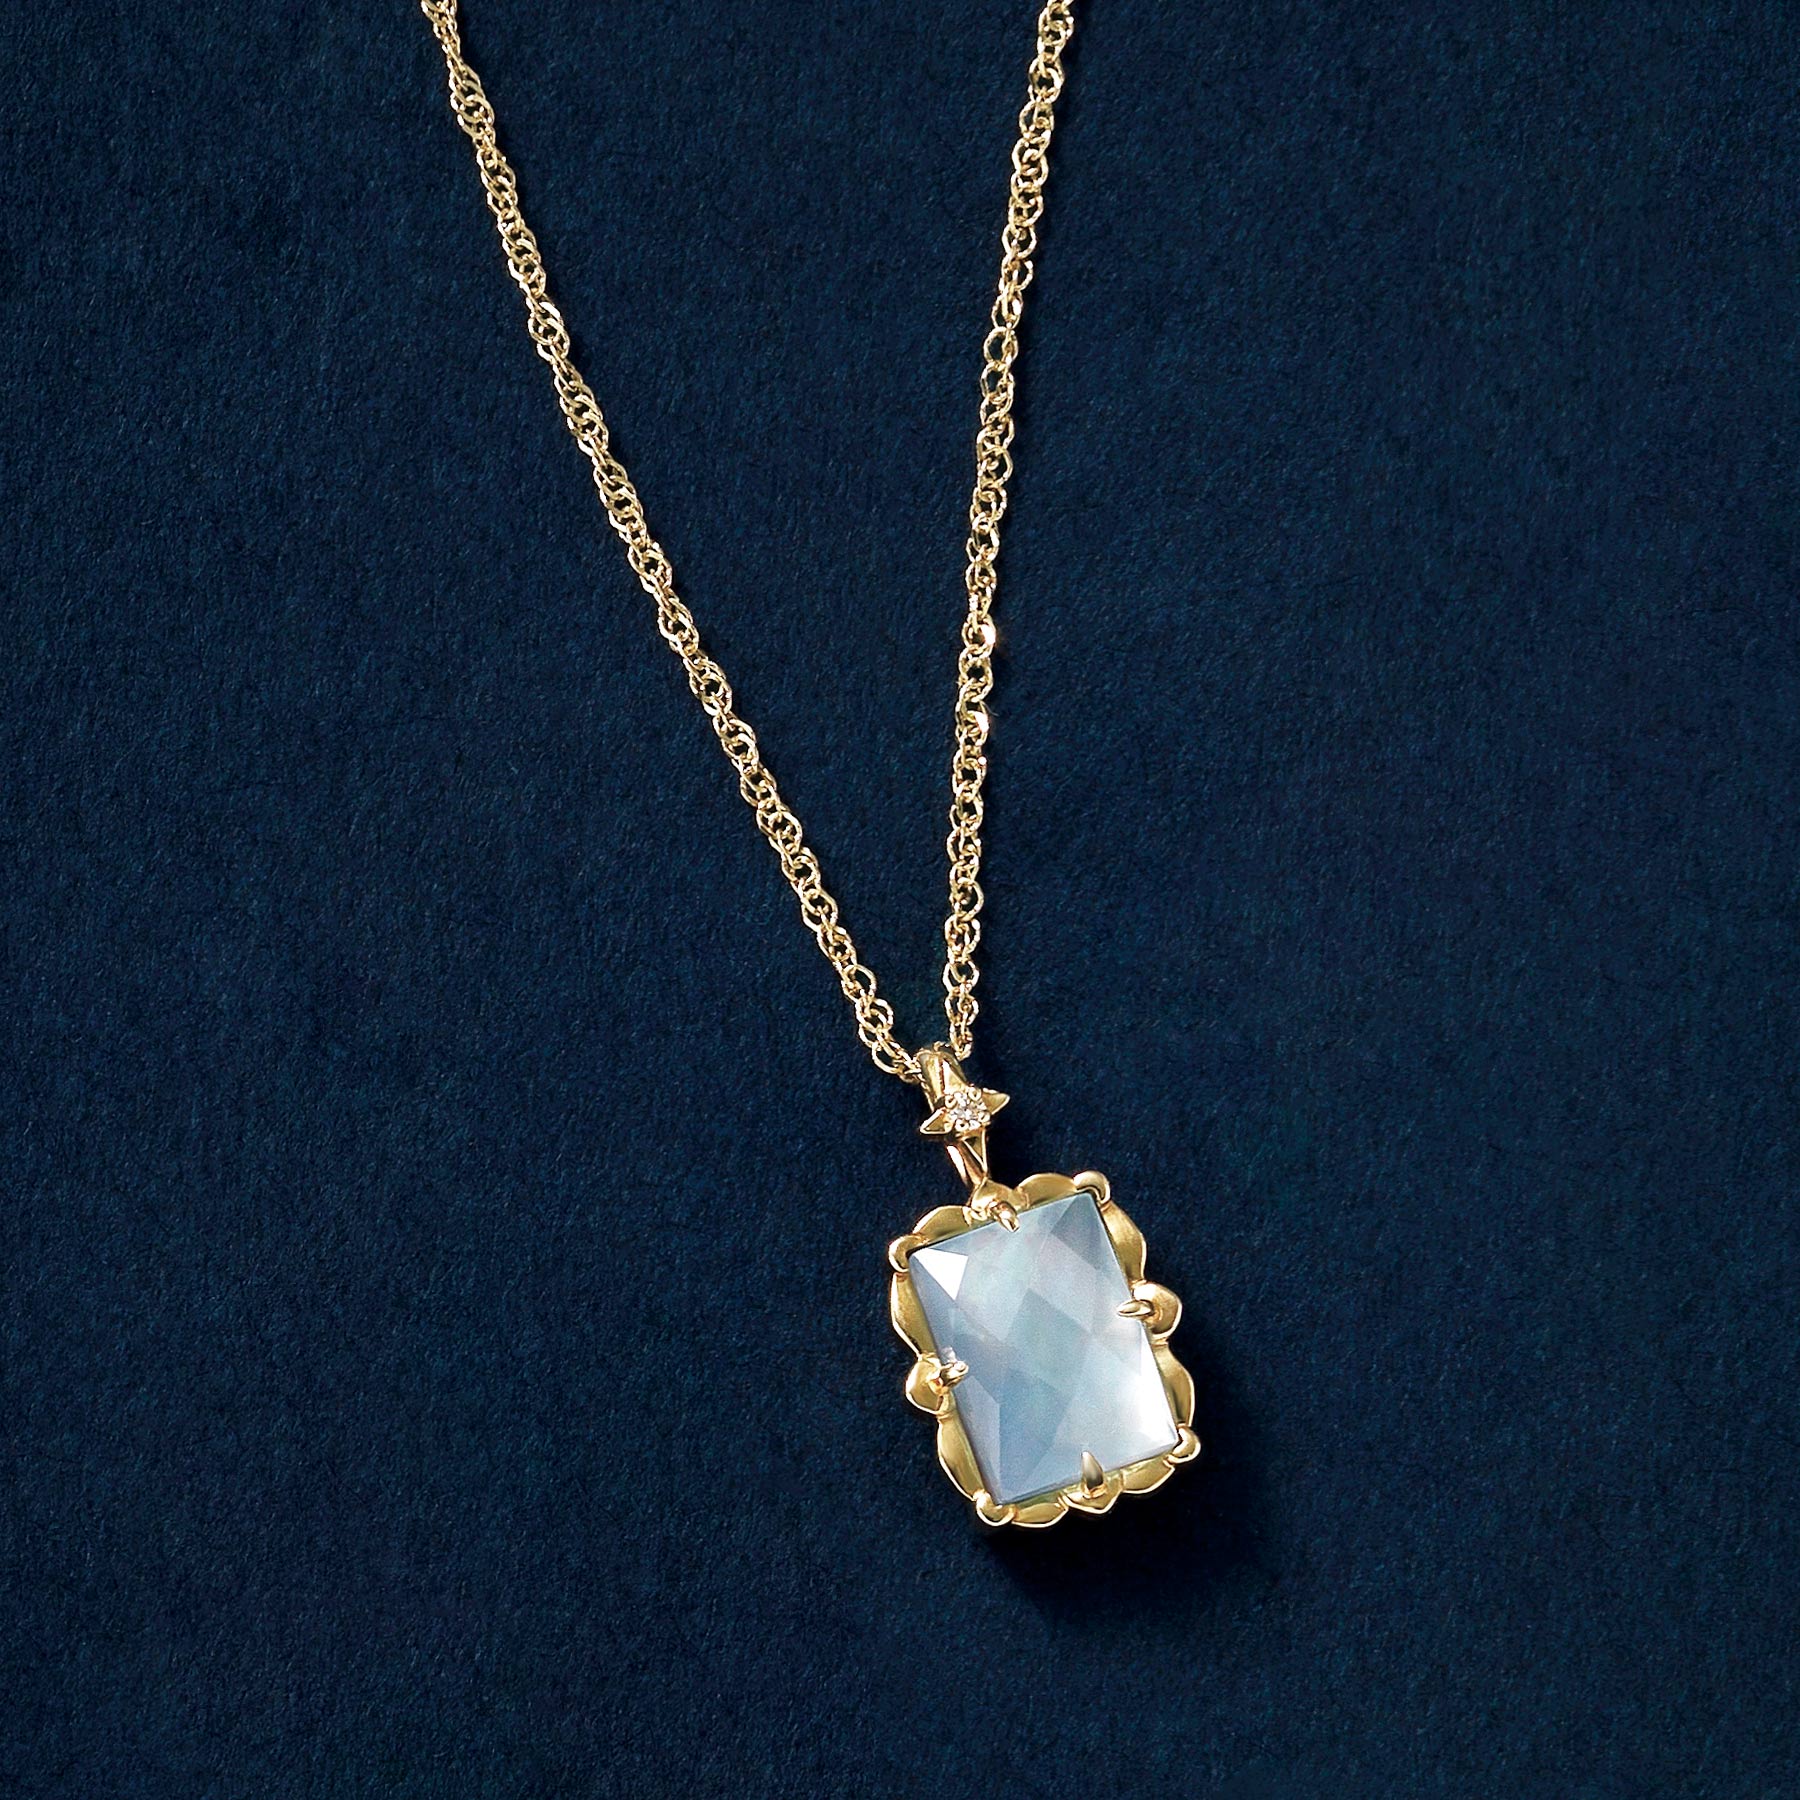 10K Blue Topaz "Crystal" Necklace (Yellow Gold) - Product Image